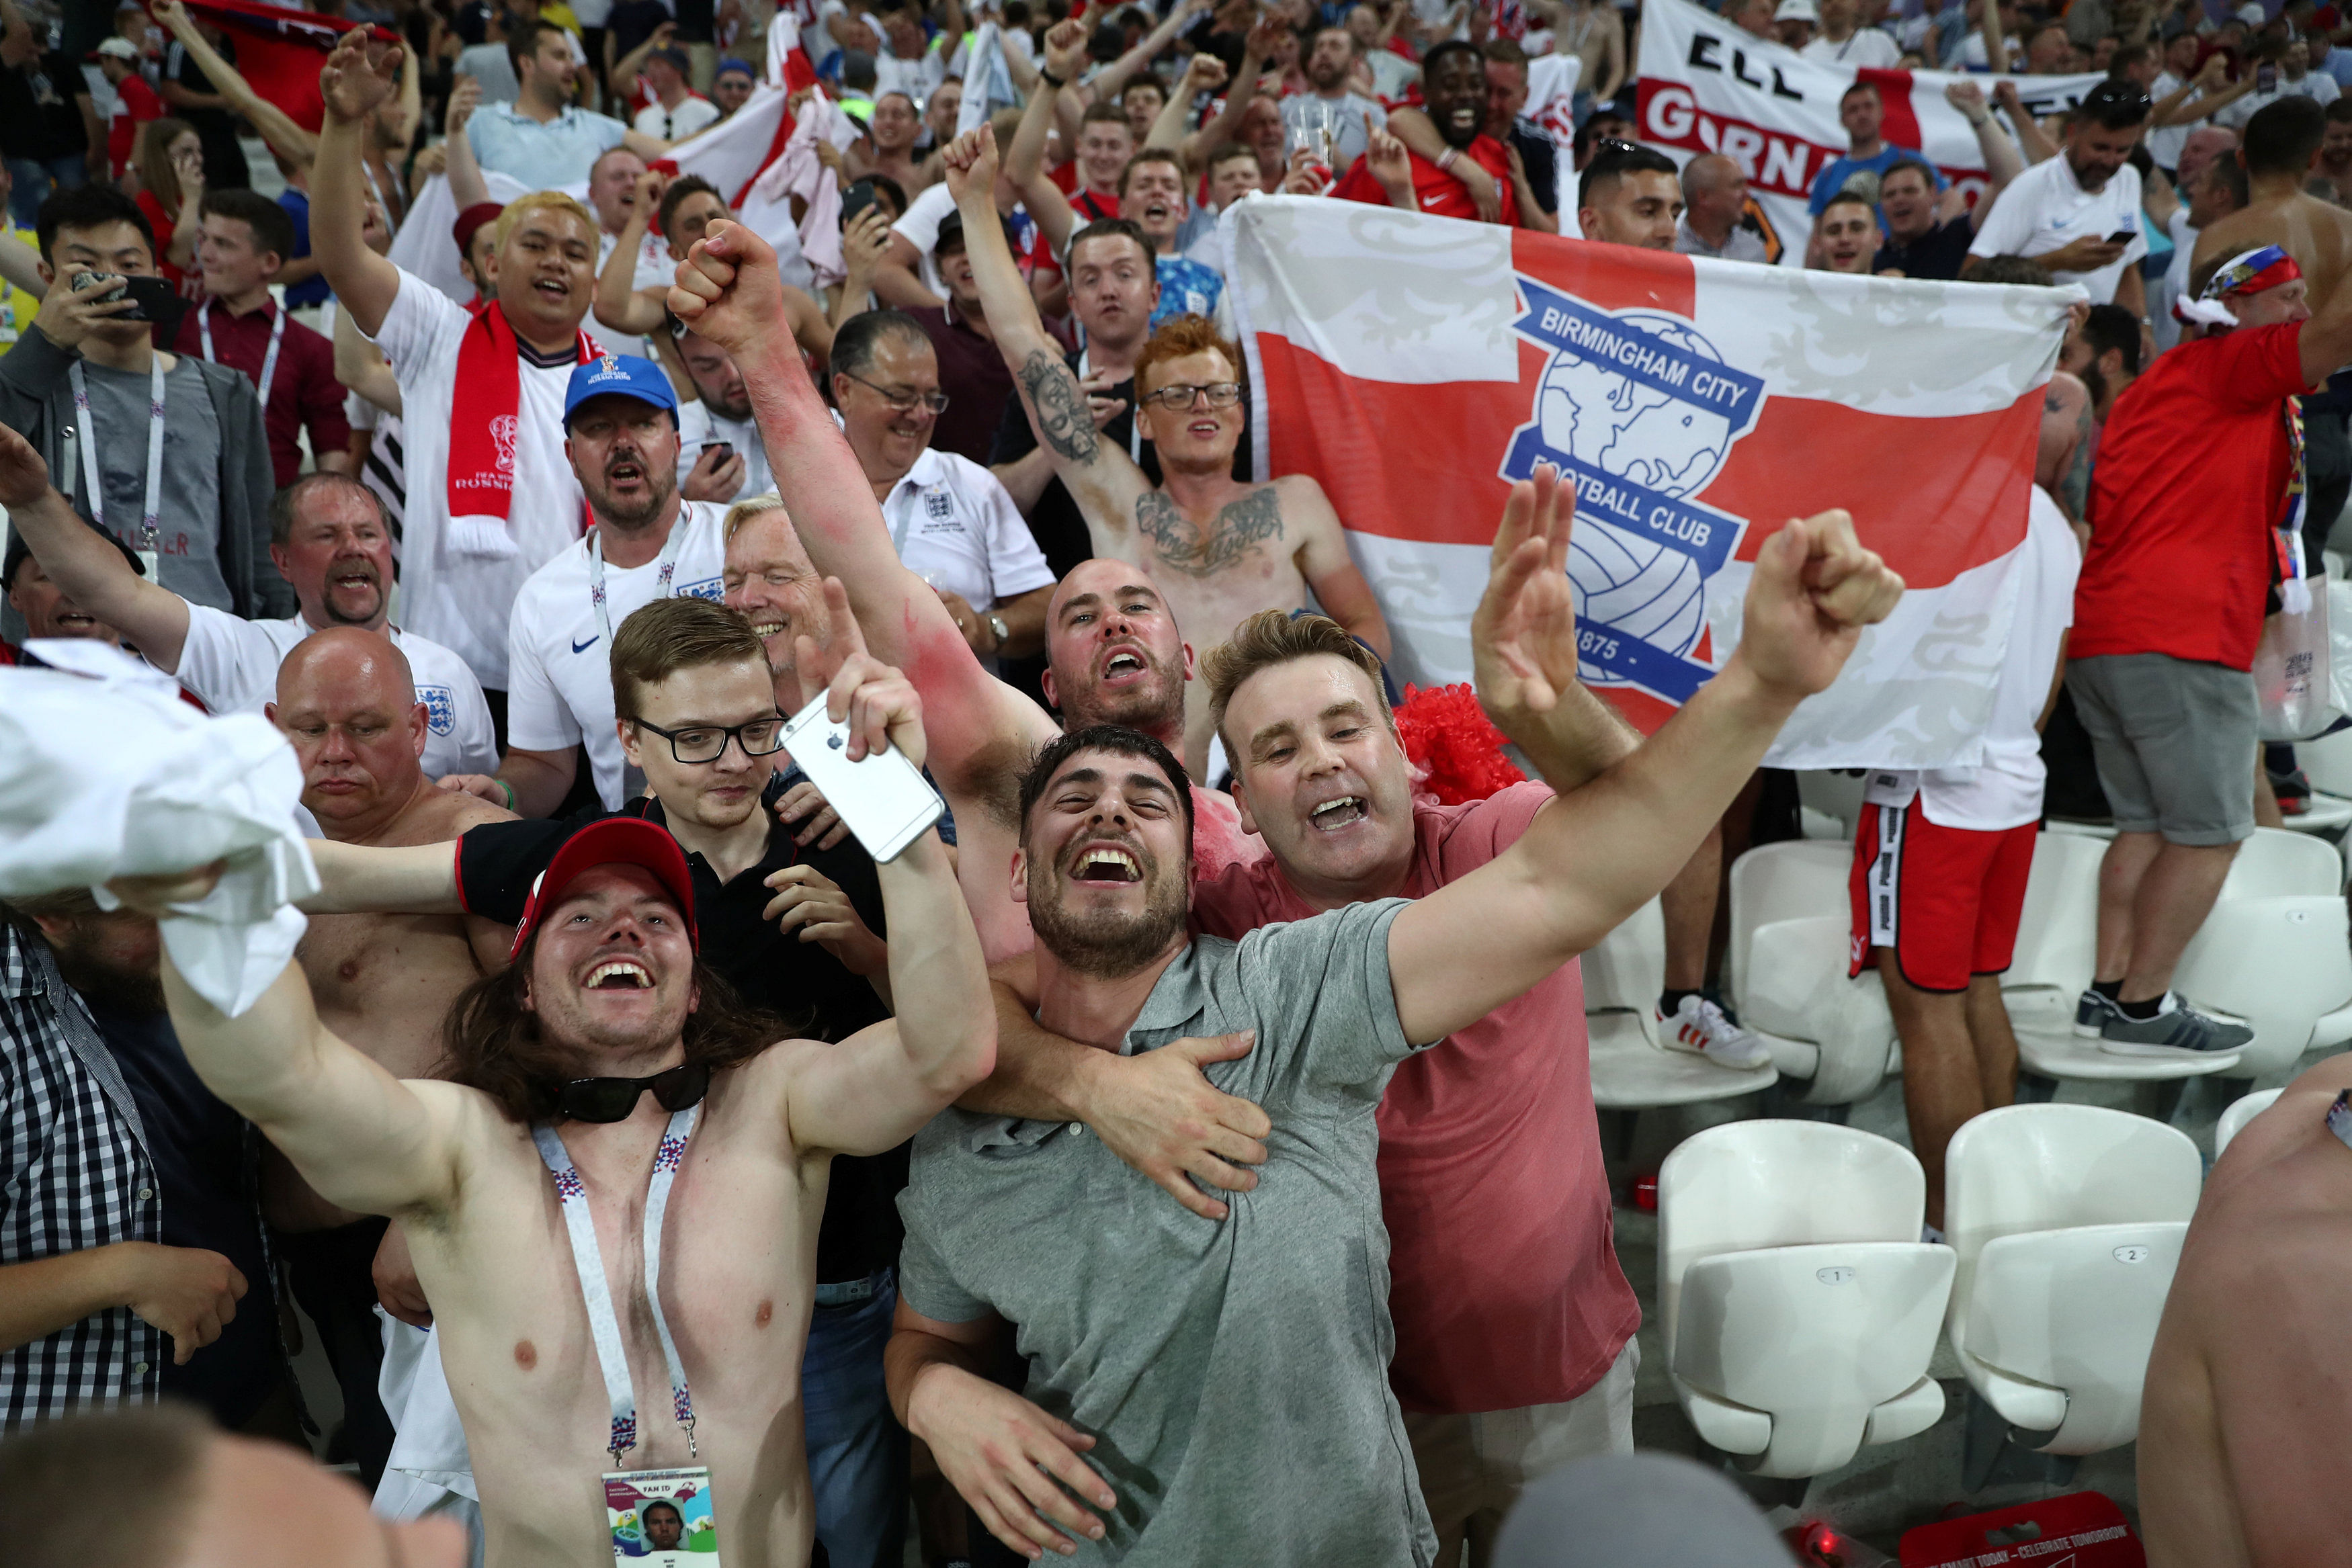 England fans celebrate their team's victory over Tunisia in a Group G encounter in Volgograd on Monday. (Reuters)